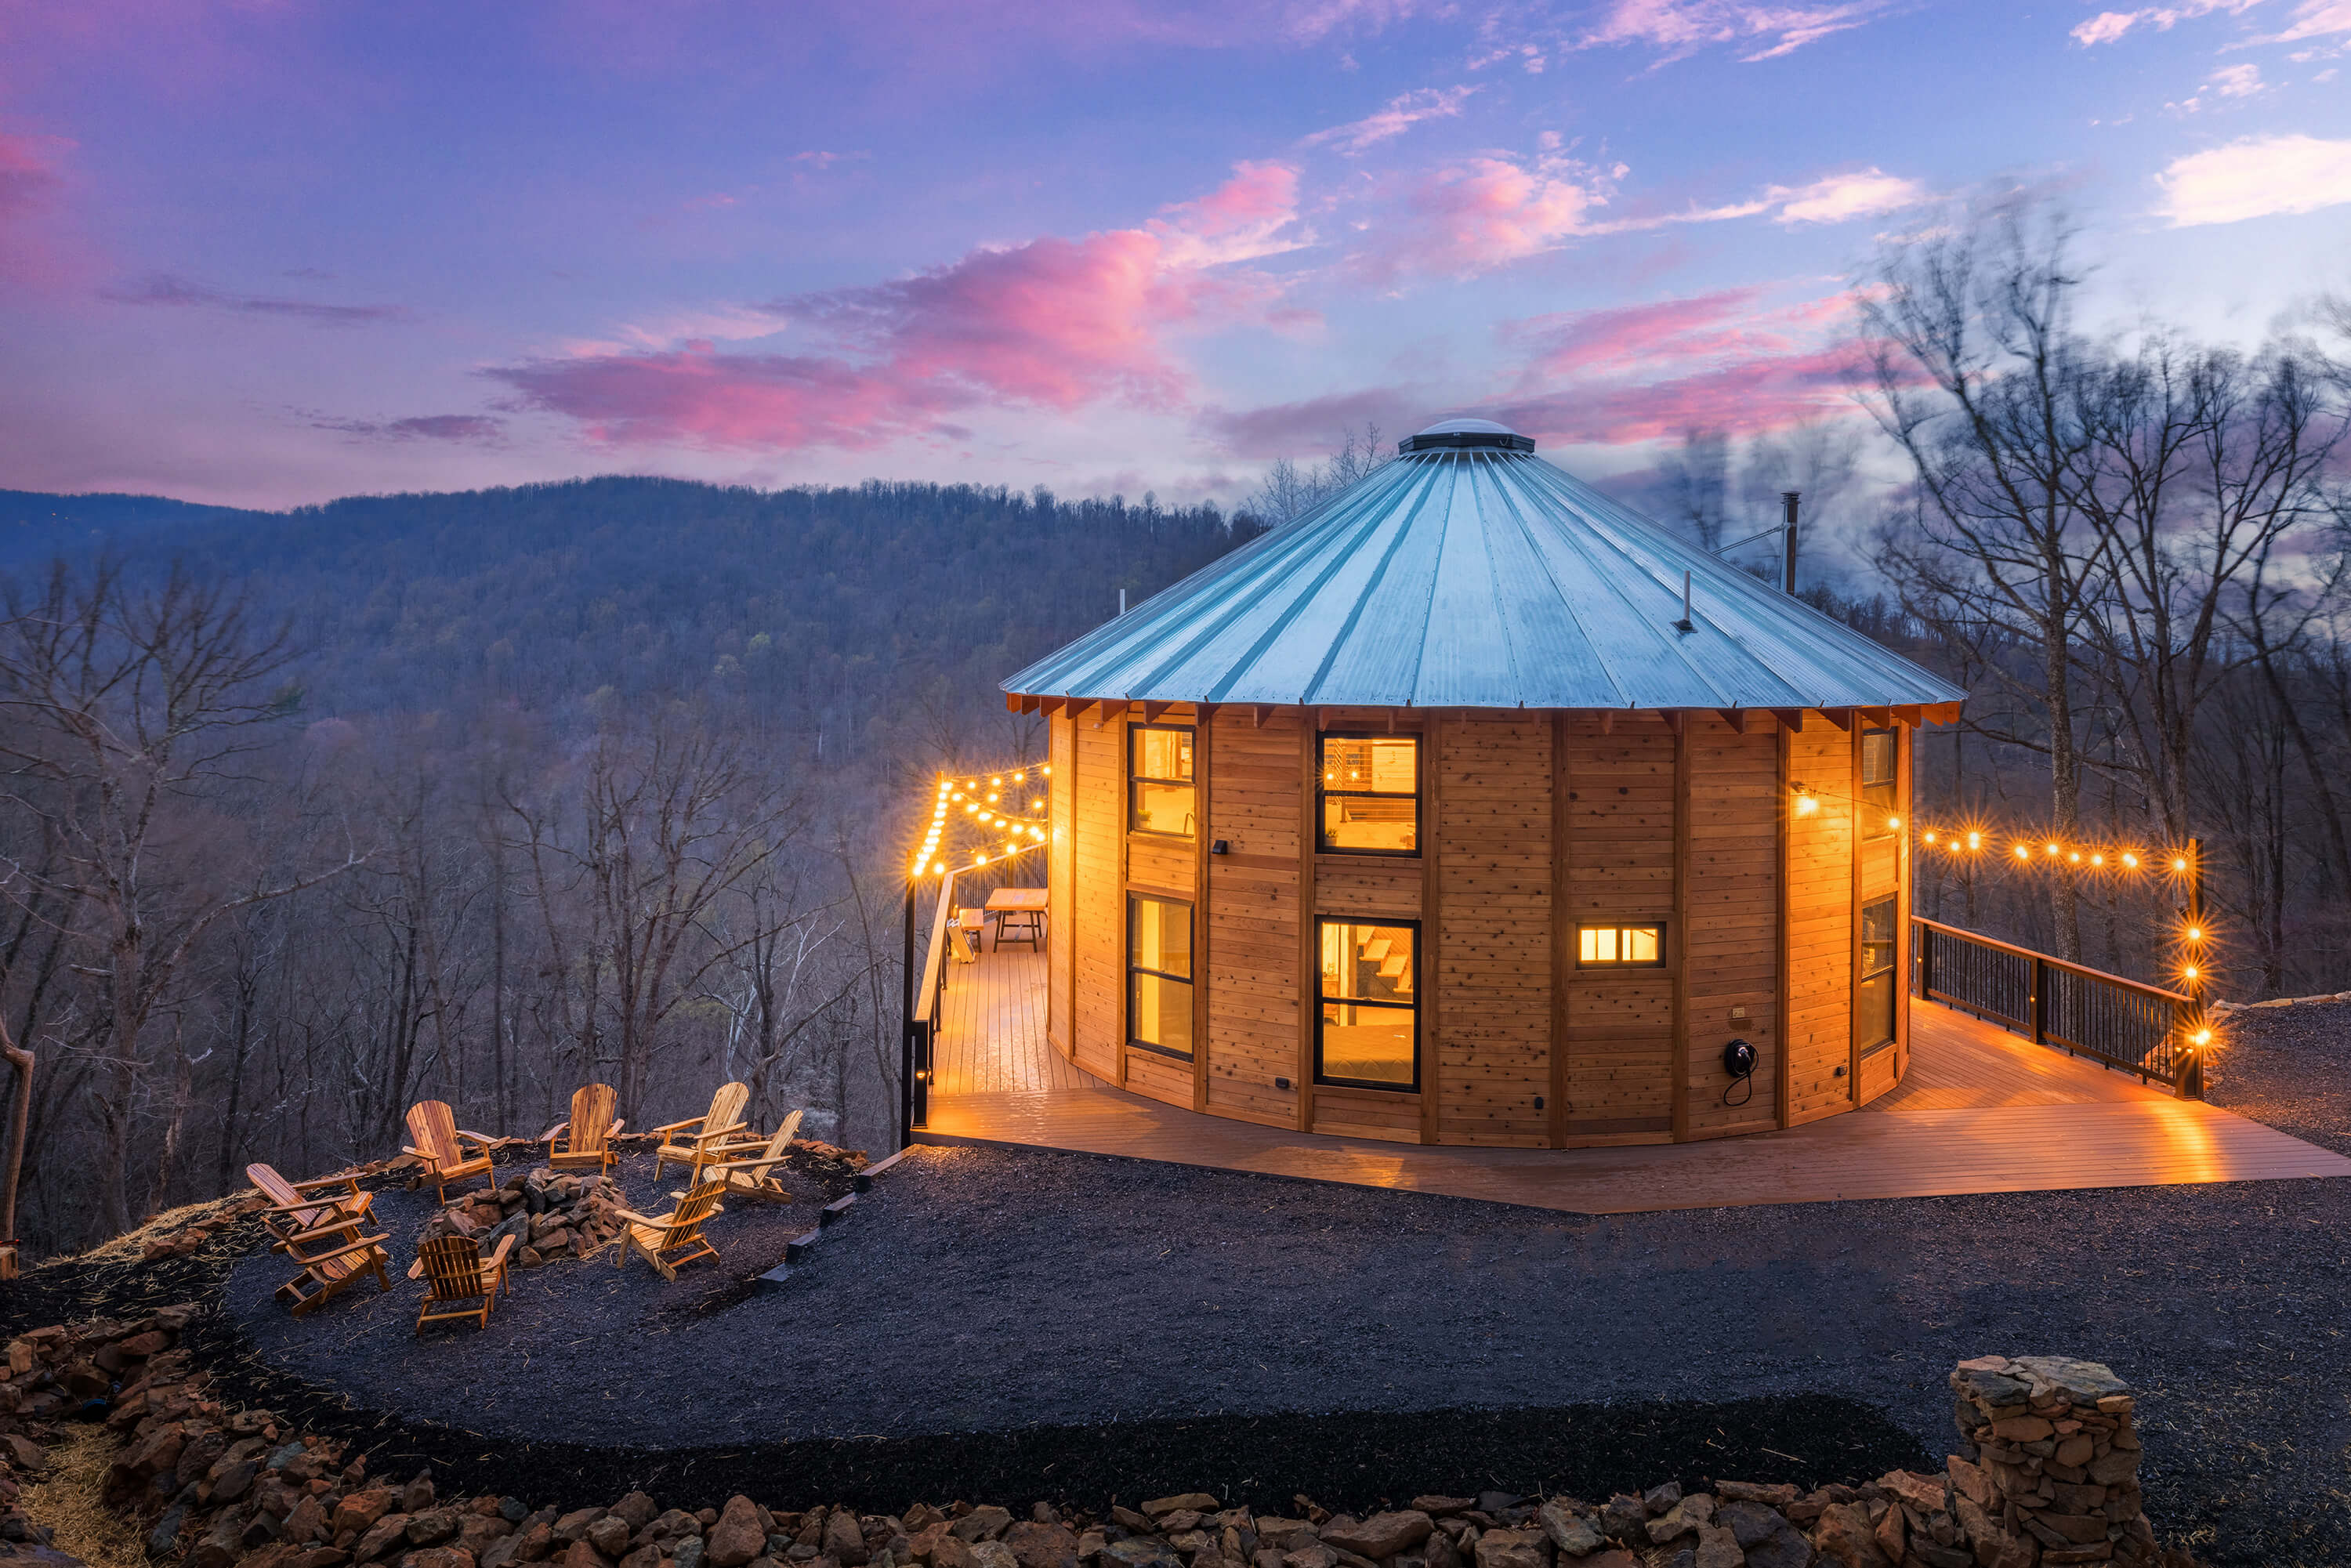 <span  class="uc_style_uc_tiles_grid_image_elementor_uc_items_attribute_title" style="color:#ffffff;">Skyline Yurt - A cabin-like two-story yurt on a wraparound deck with a hot tub, archery, wood stove, firepit, and all the modern amenities only an hour from Washington DC</span>